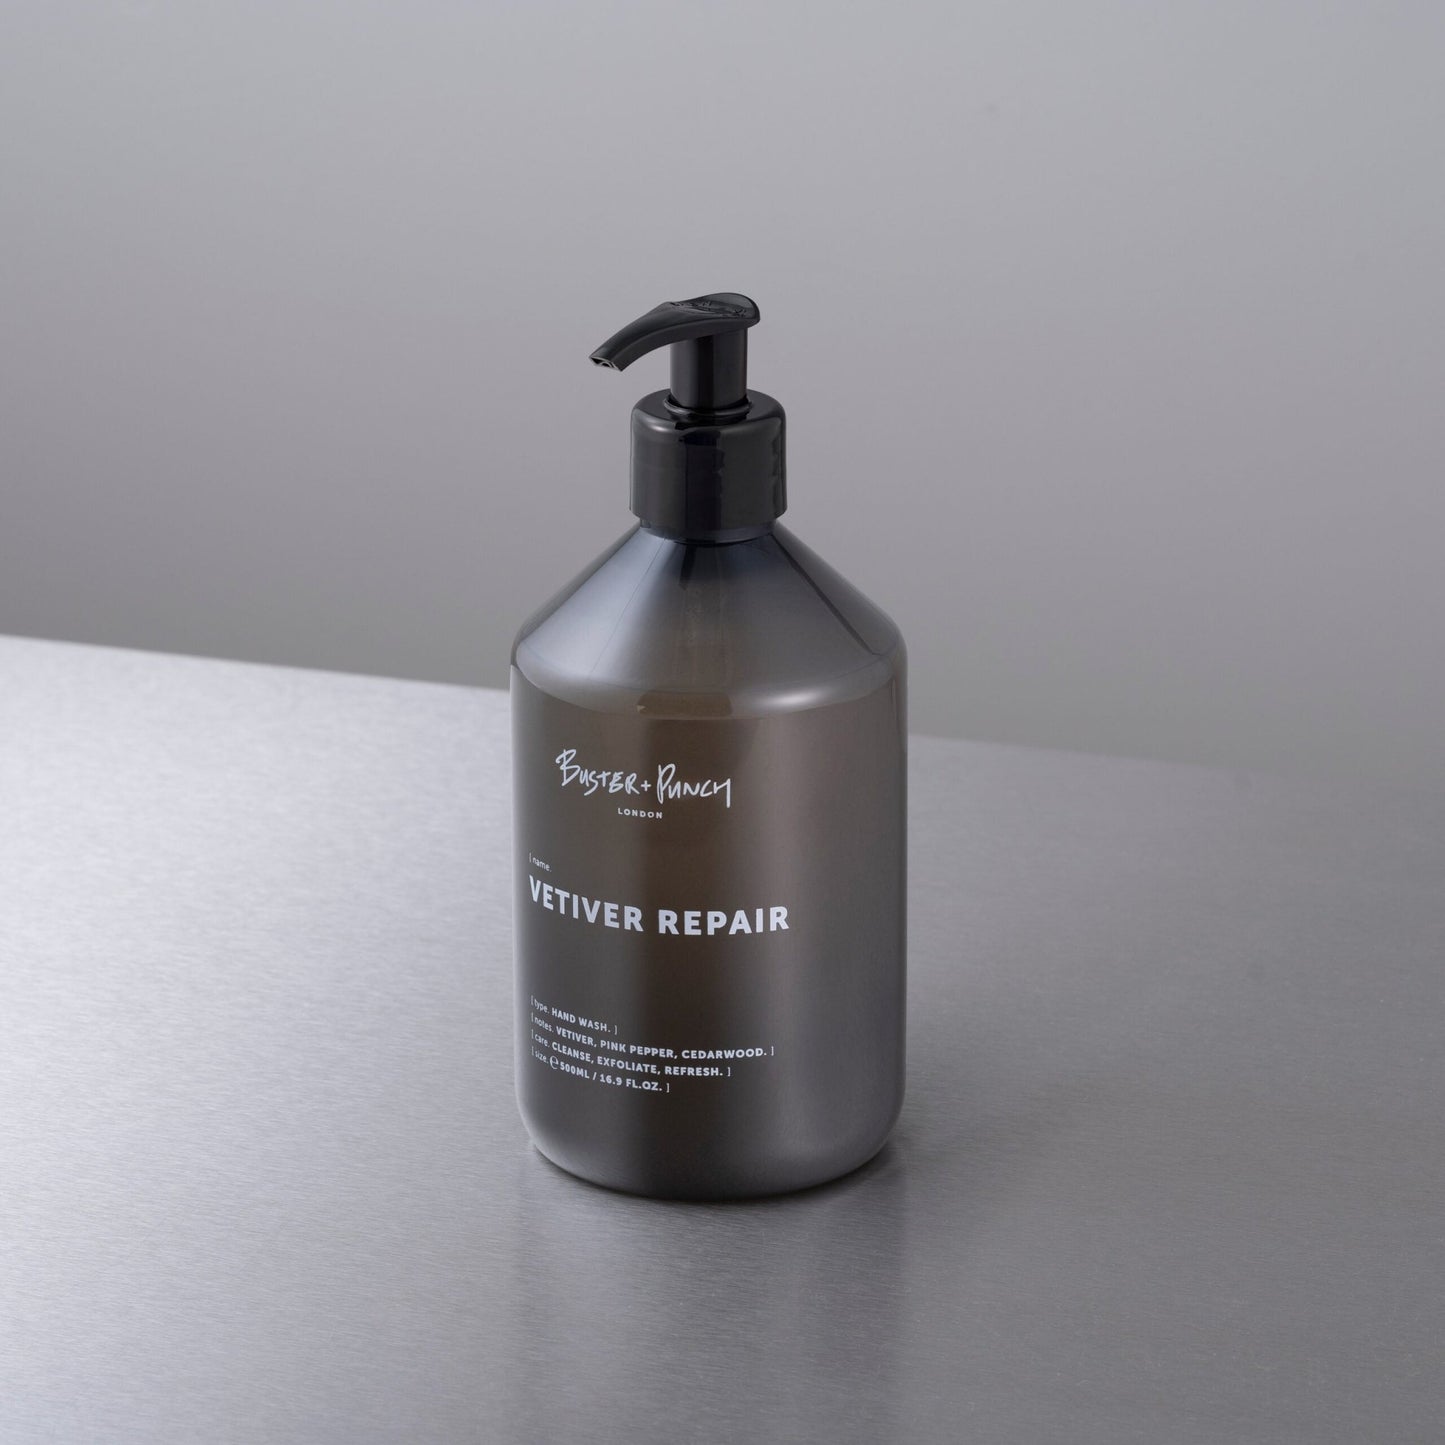 Buster + Punch Hand Wash - VETIVER REPAIR - |VESIMI Design| Luxury and Rustic bathrooms online